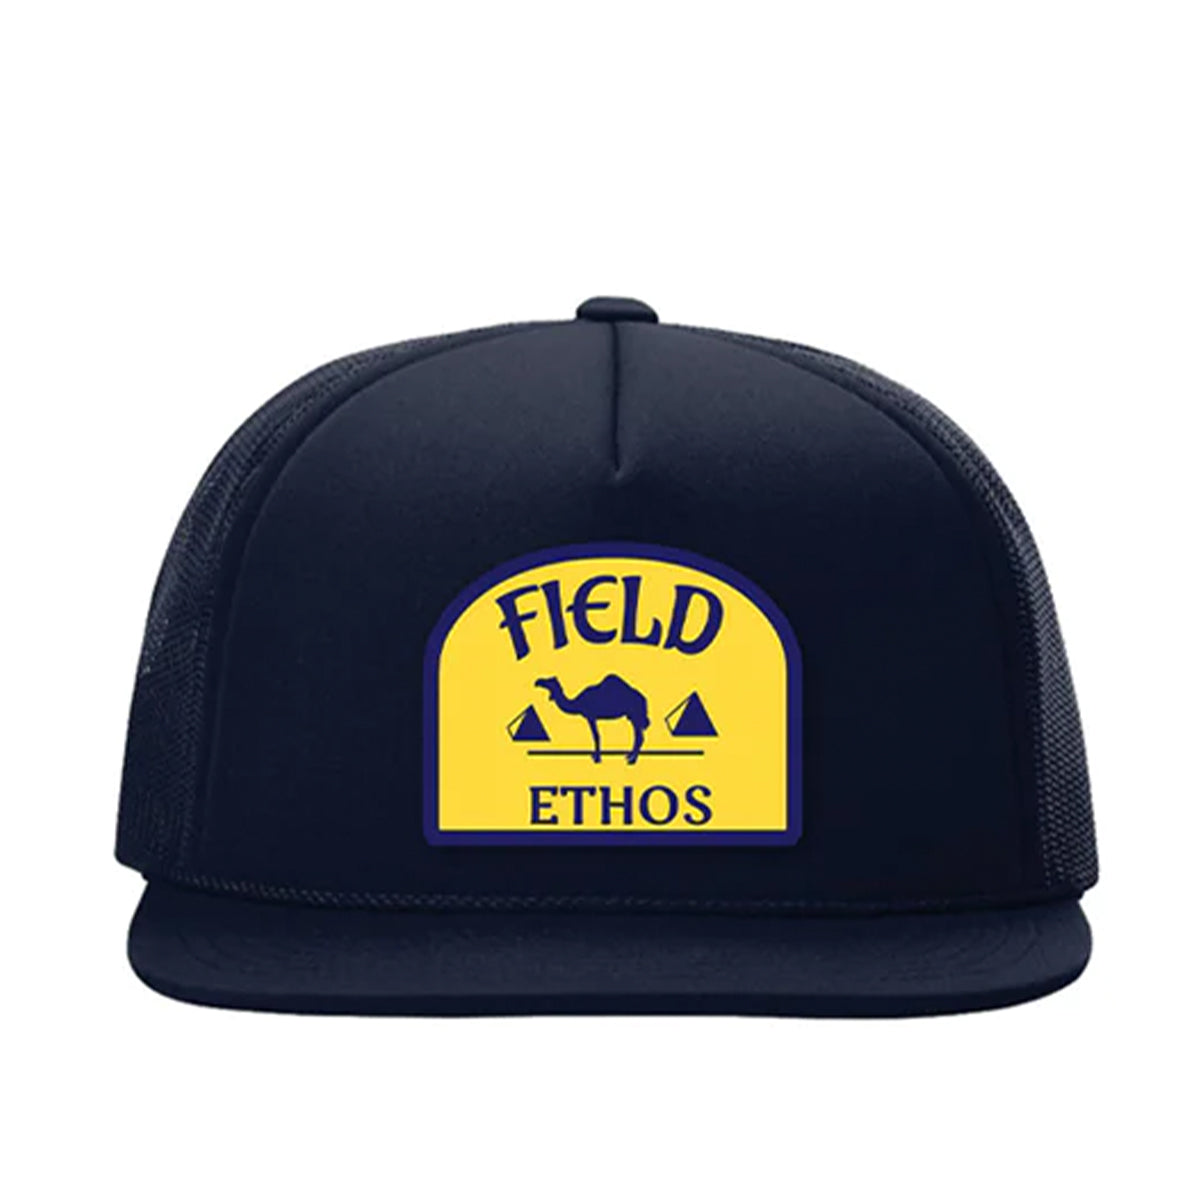 Ethos The – Field Hat Field Ethos Journal Rover